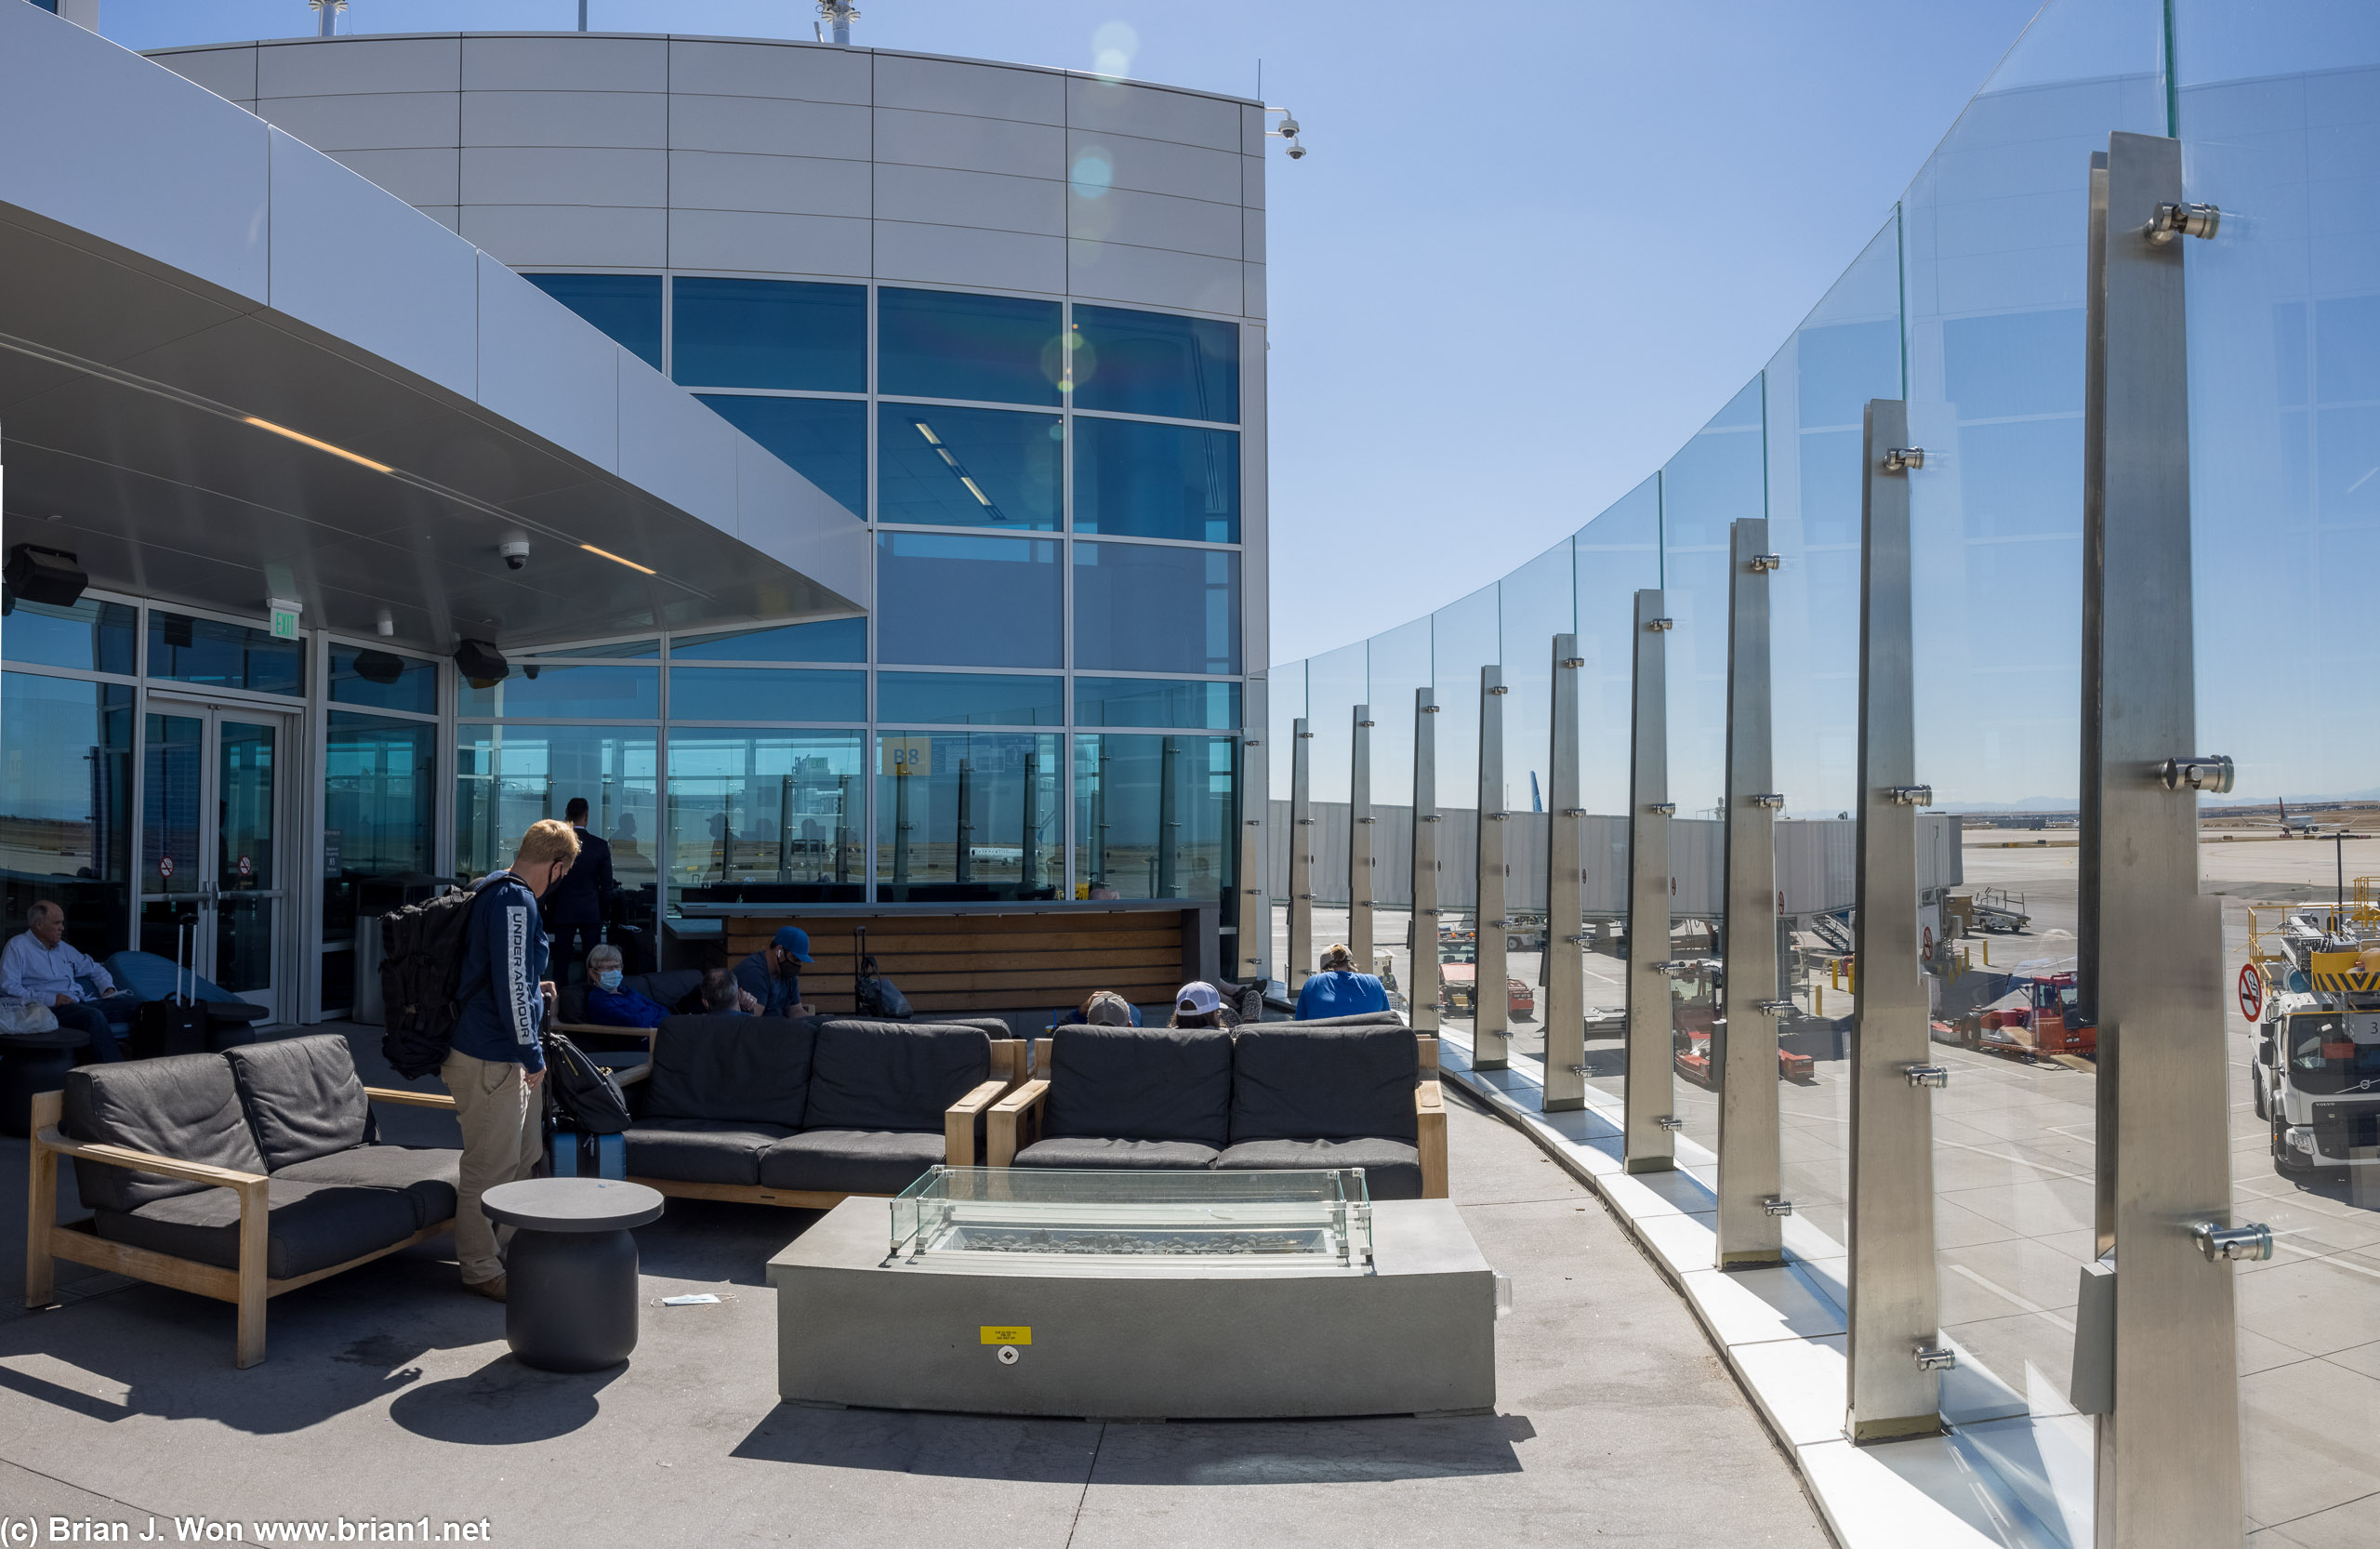 One more shot of outdoor patio at the very end of Concourse B.